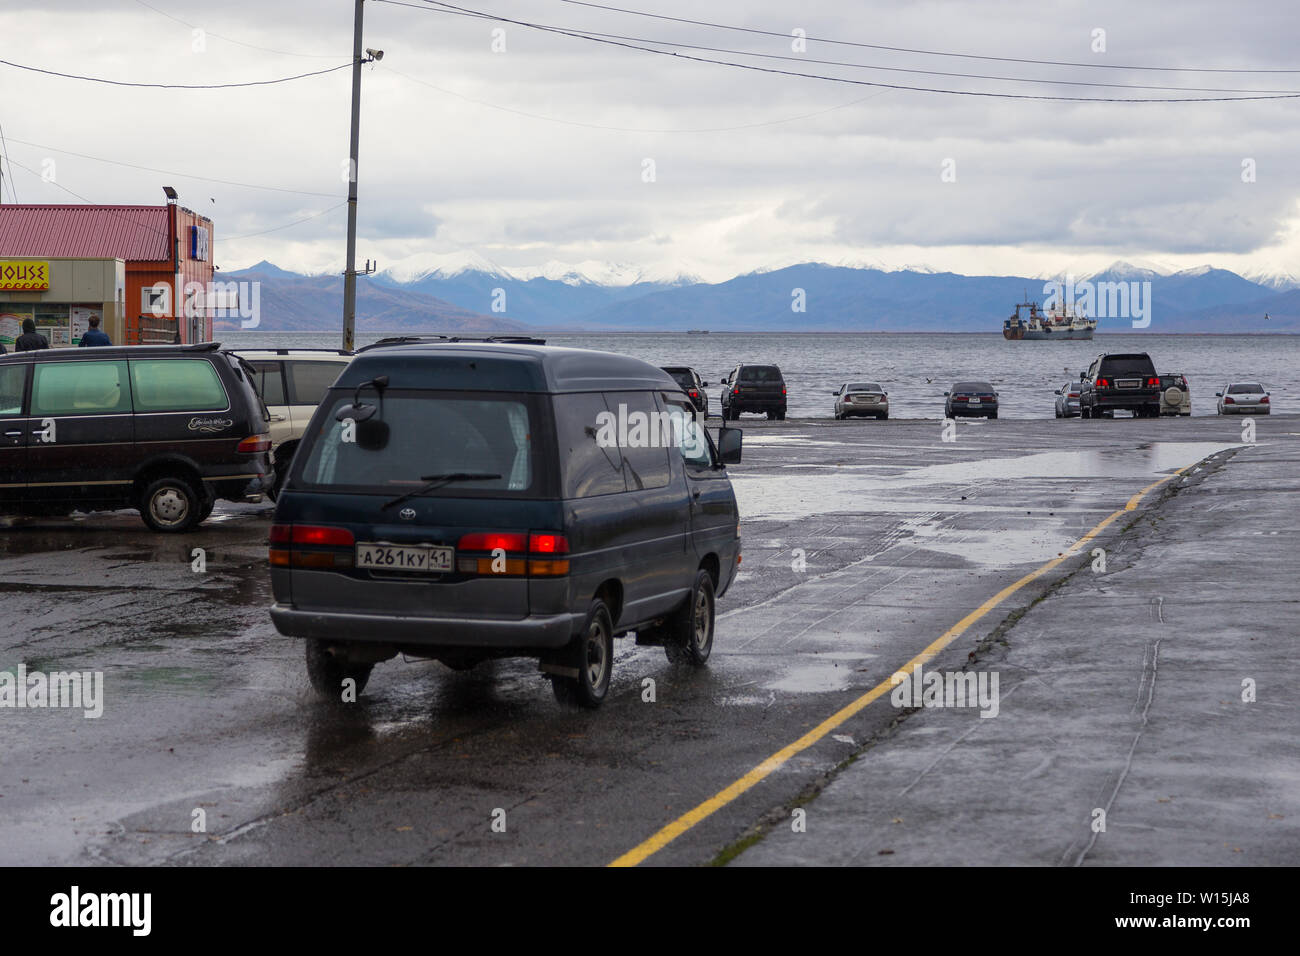 Petropavlovsk-Kamchatsky, Russia- 05 October 2014: Cars on the ca park near Avacha Bay. Ships standing in the roadstead, mountain in the background. Stock Photo